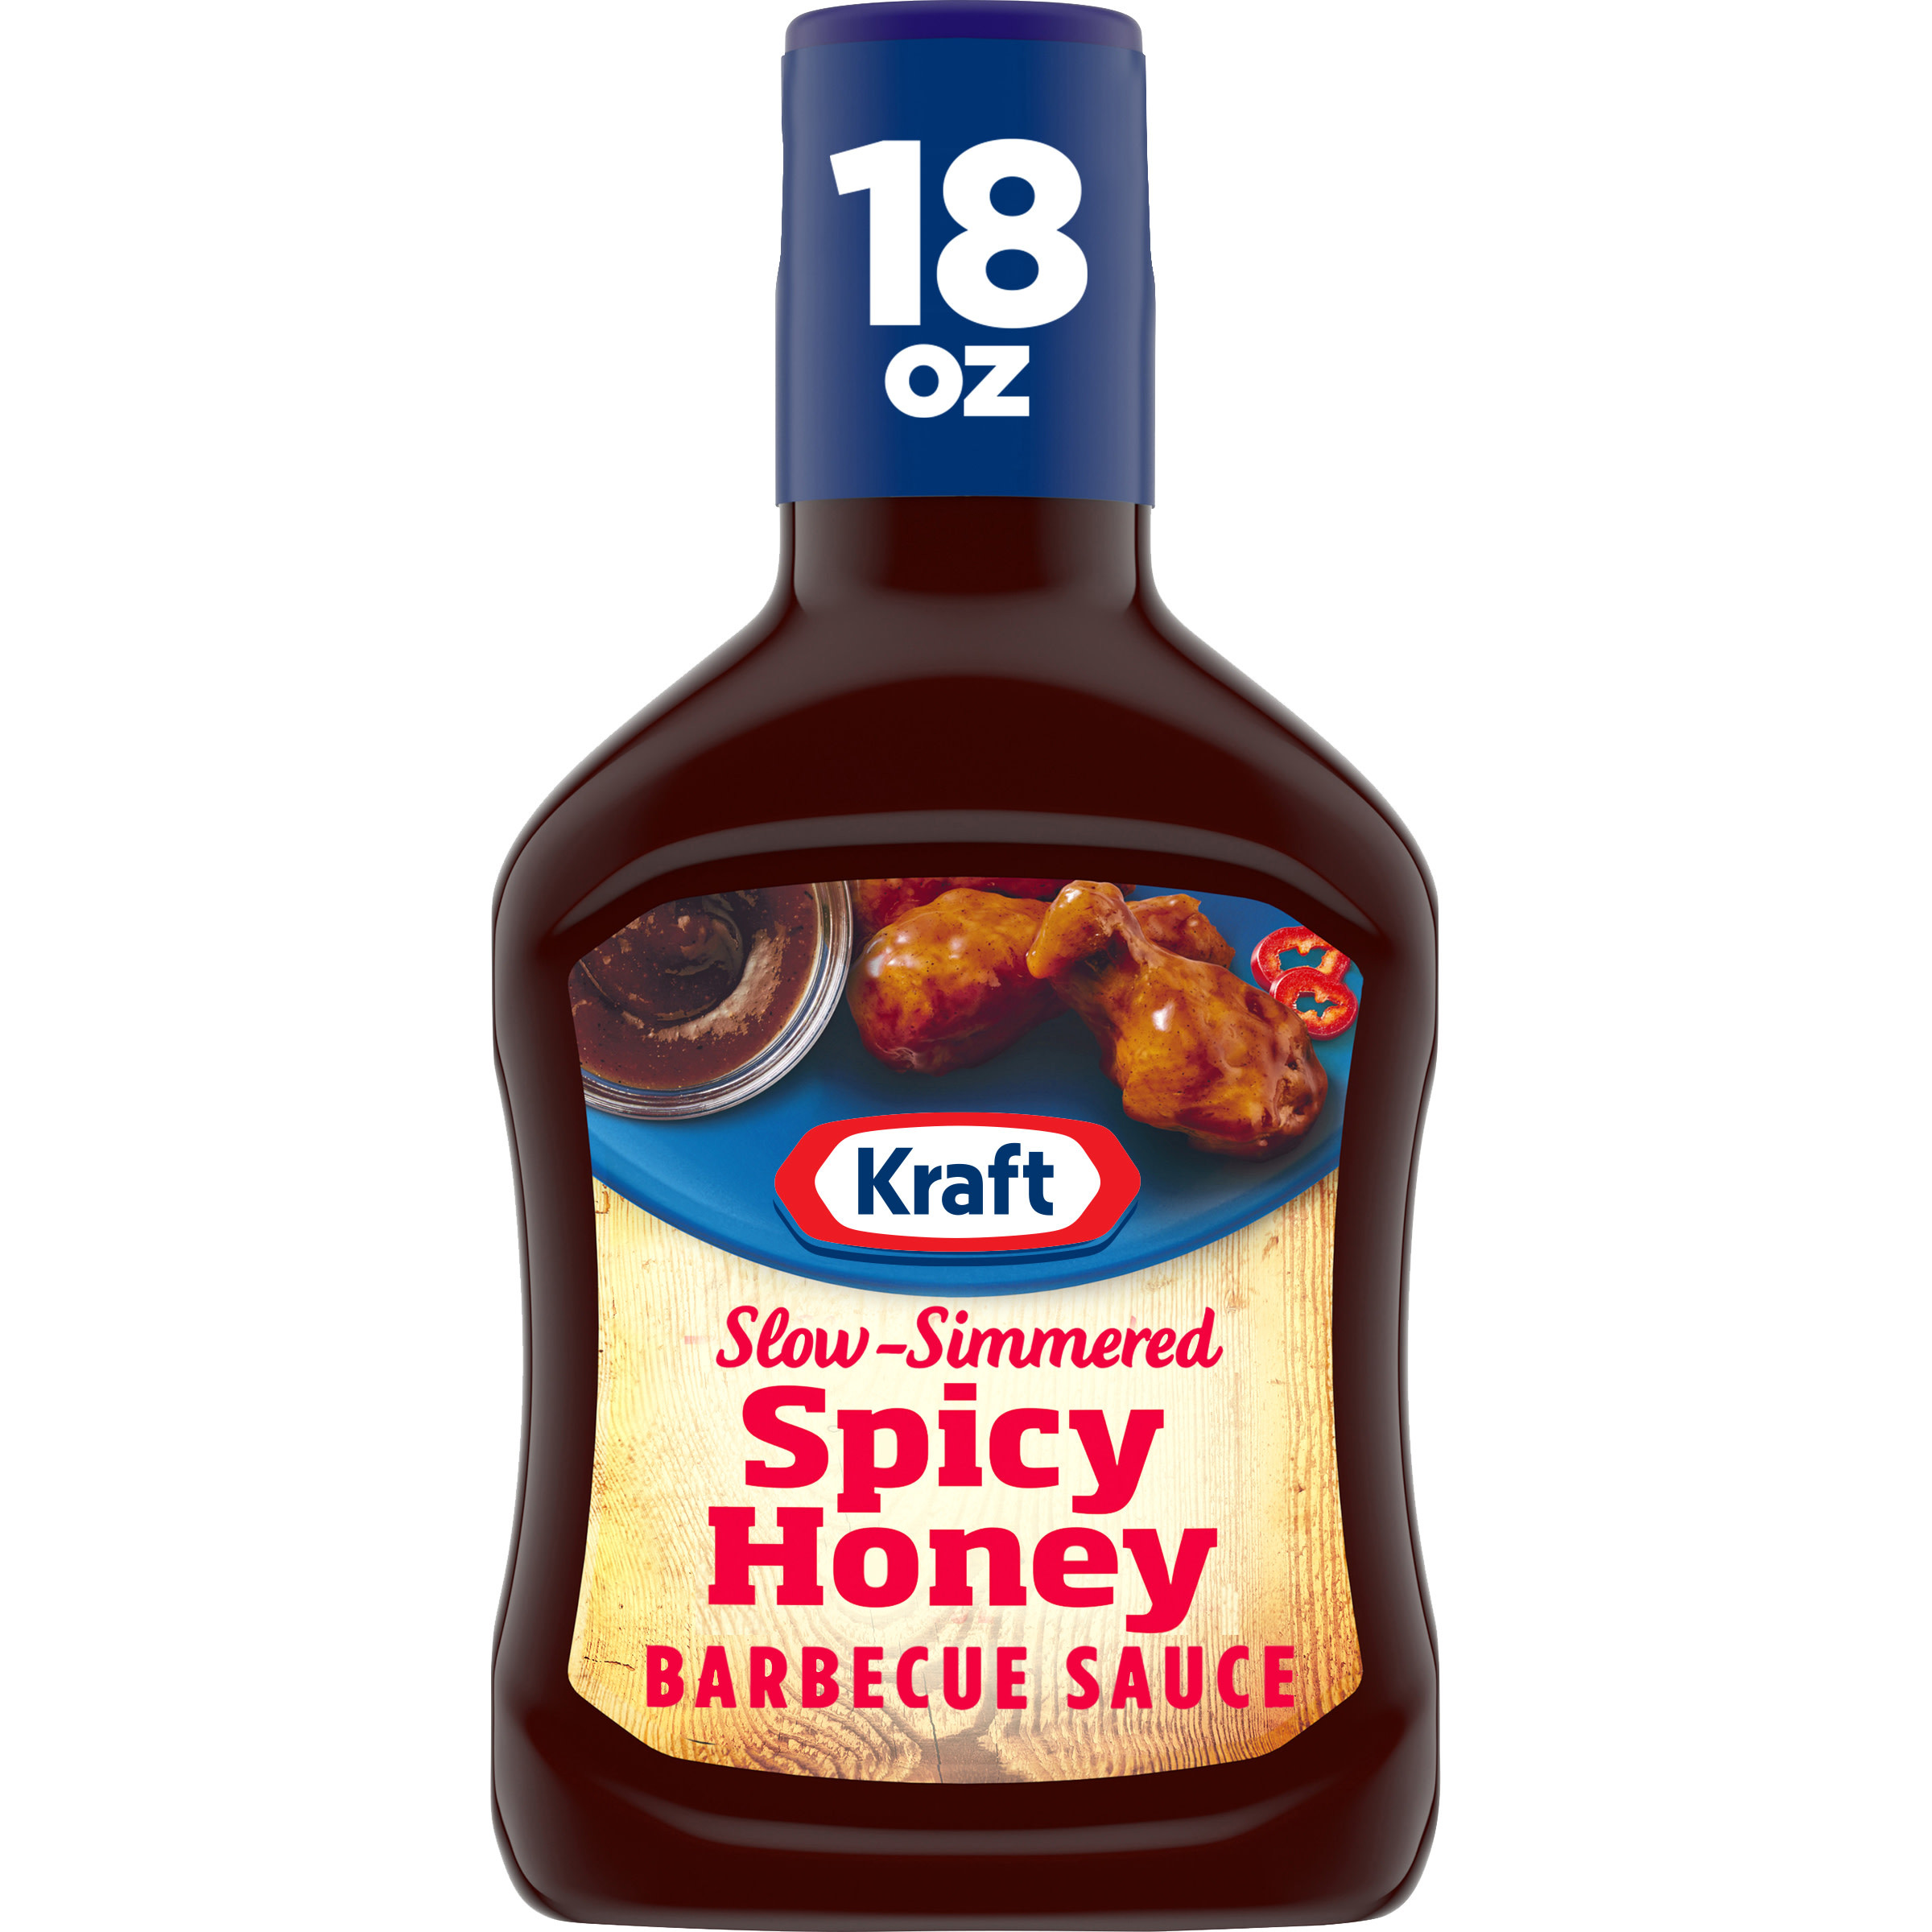 Honey Bbq Sauce New Kraft Slow Simmered Spicy Honey Barbecue Sauce Bottle and